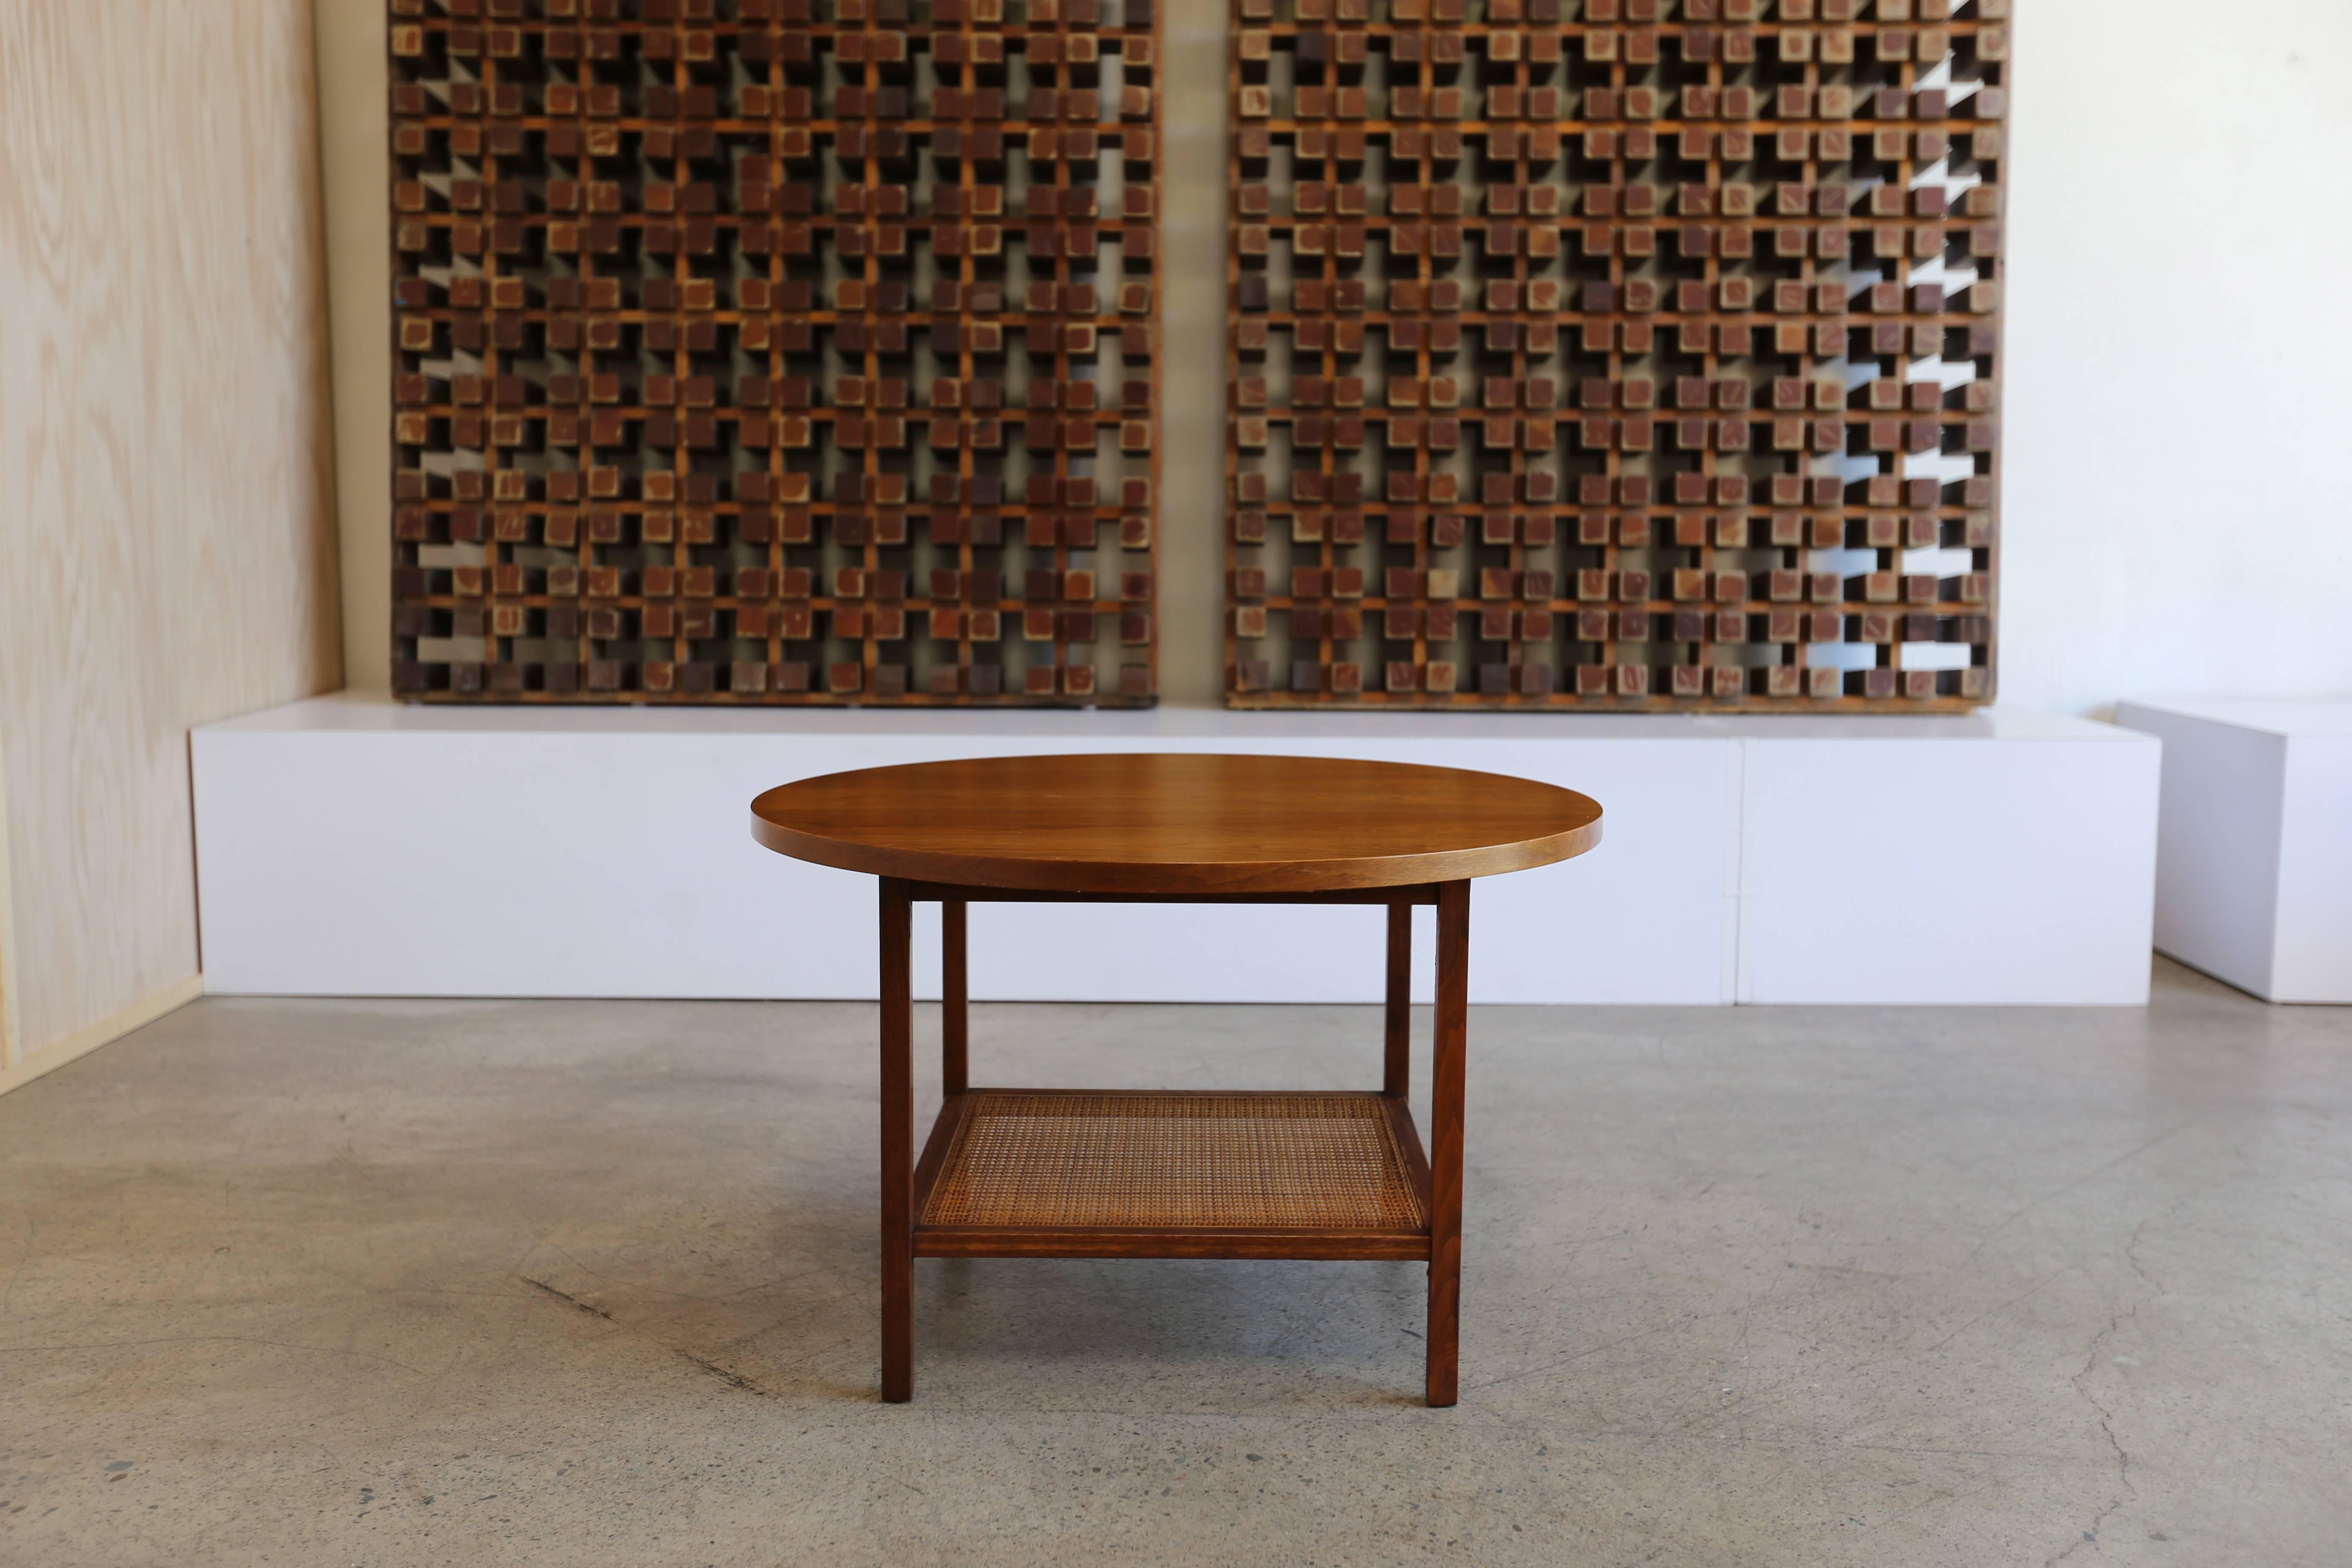 Round walnut and cane side table by Paul McCobb for Calvin Furniture Company.